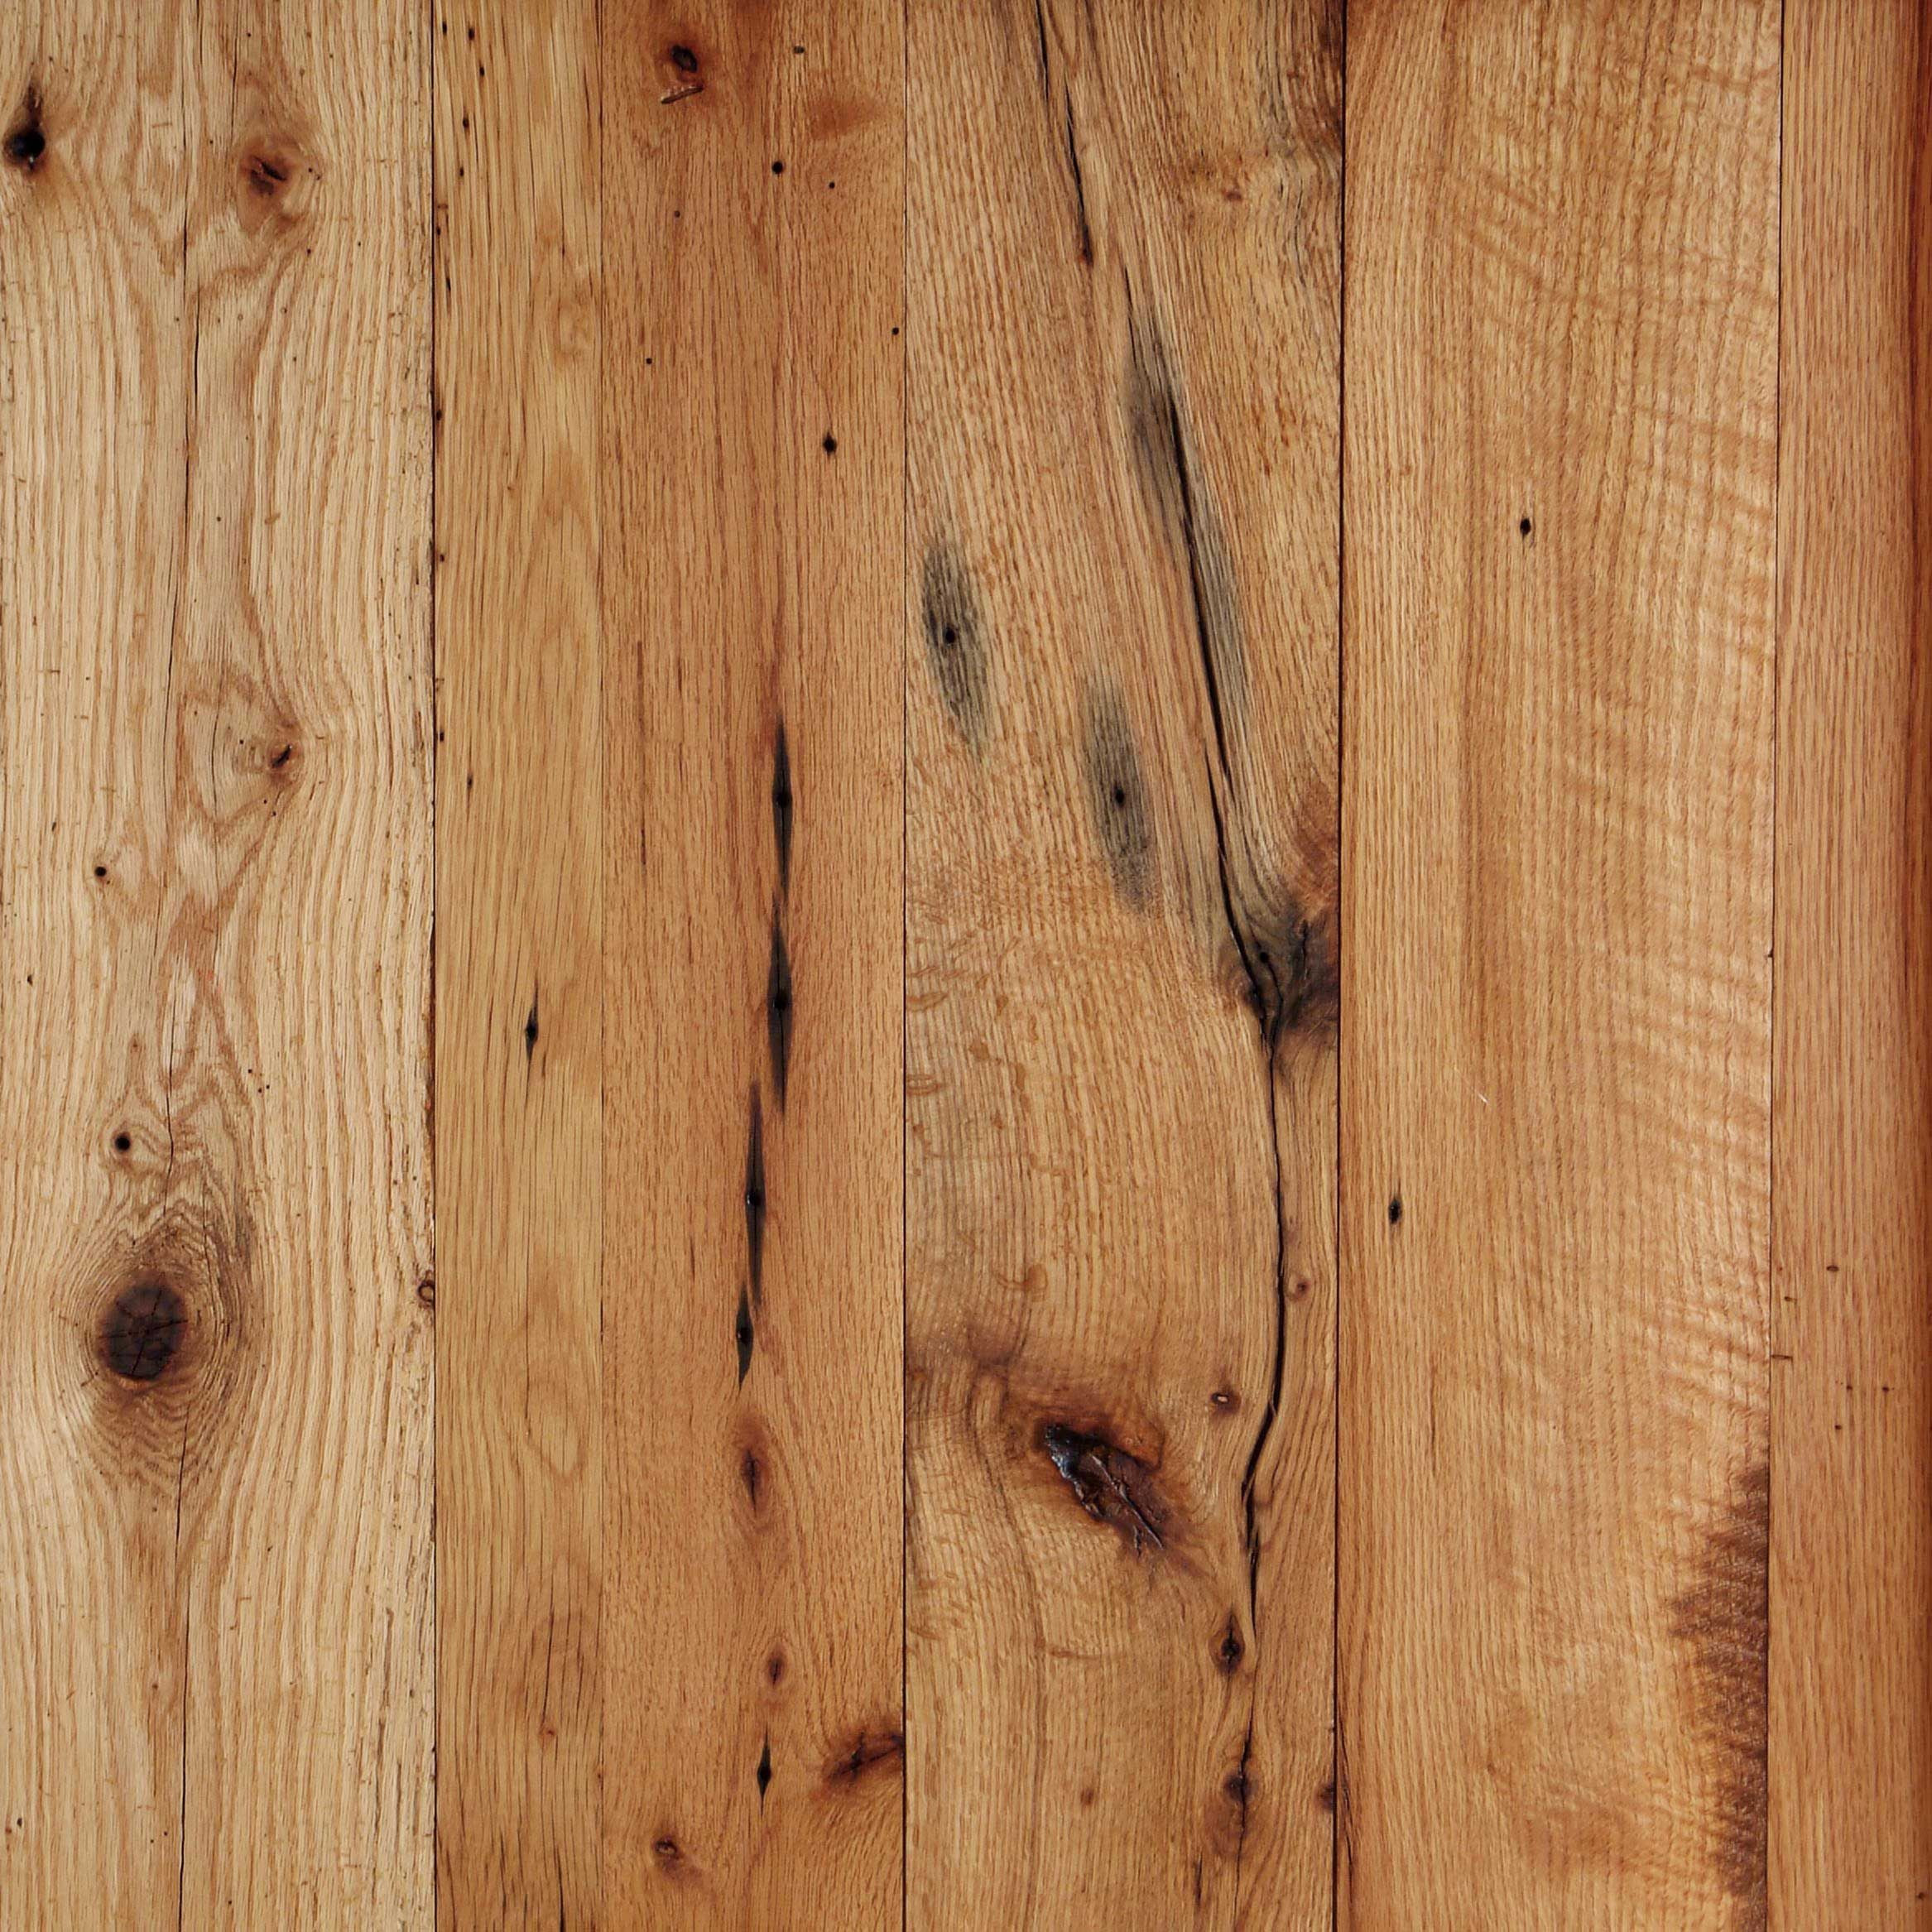 15 Unique 3 4 Inch Hardwood Flooring 2024 free download 3 4 inch hardwood flooring of reclaimed salvaged antique red oak flooring wide boards knots throughout reclaimed salvaged antique red oak flooring wide boards knots